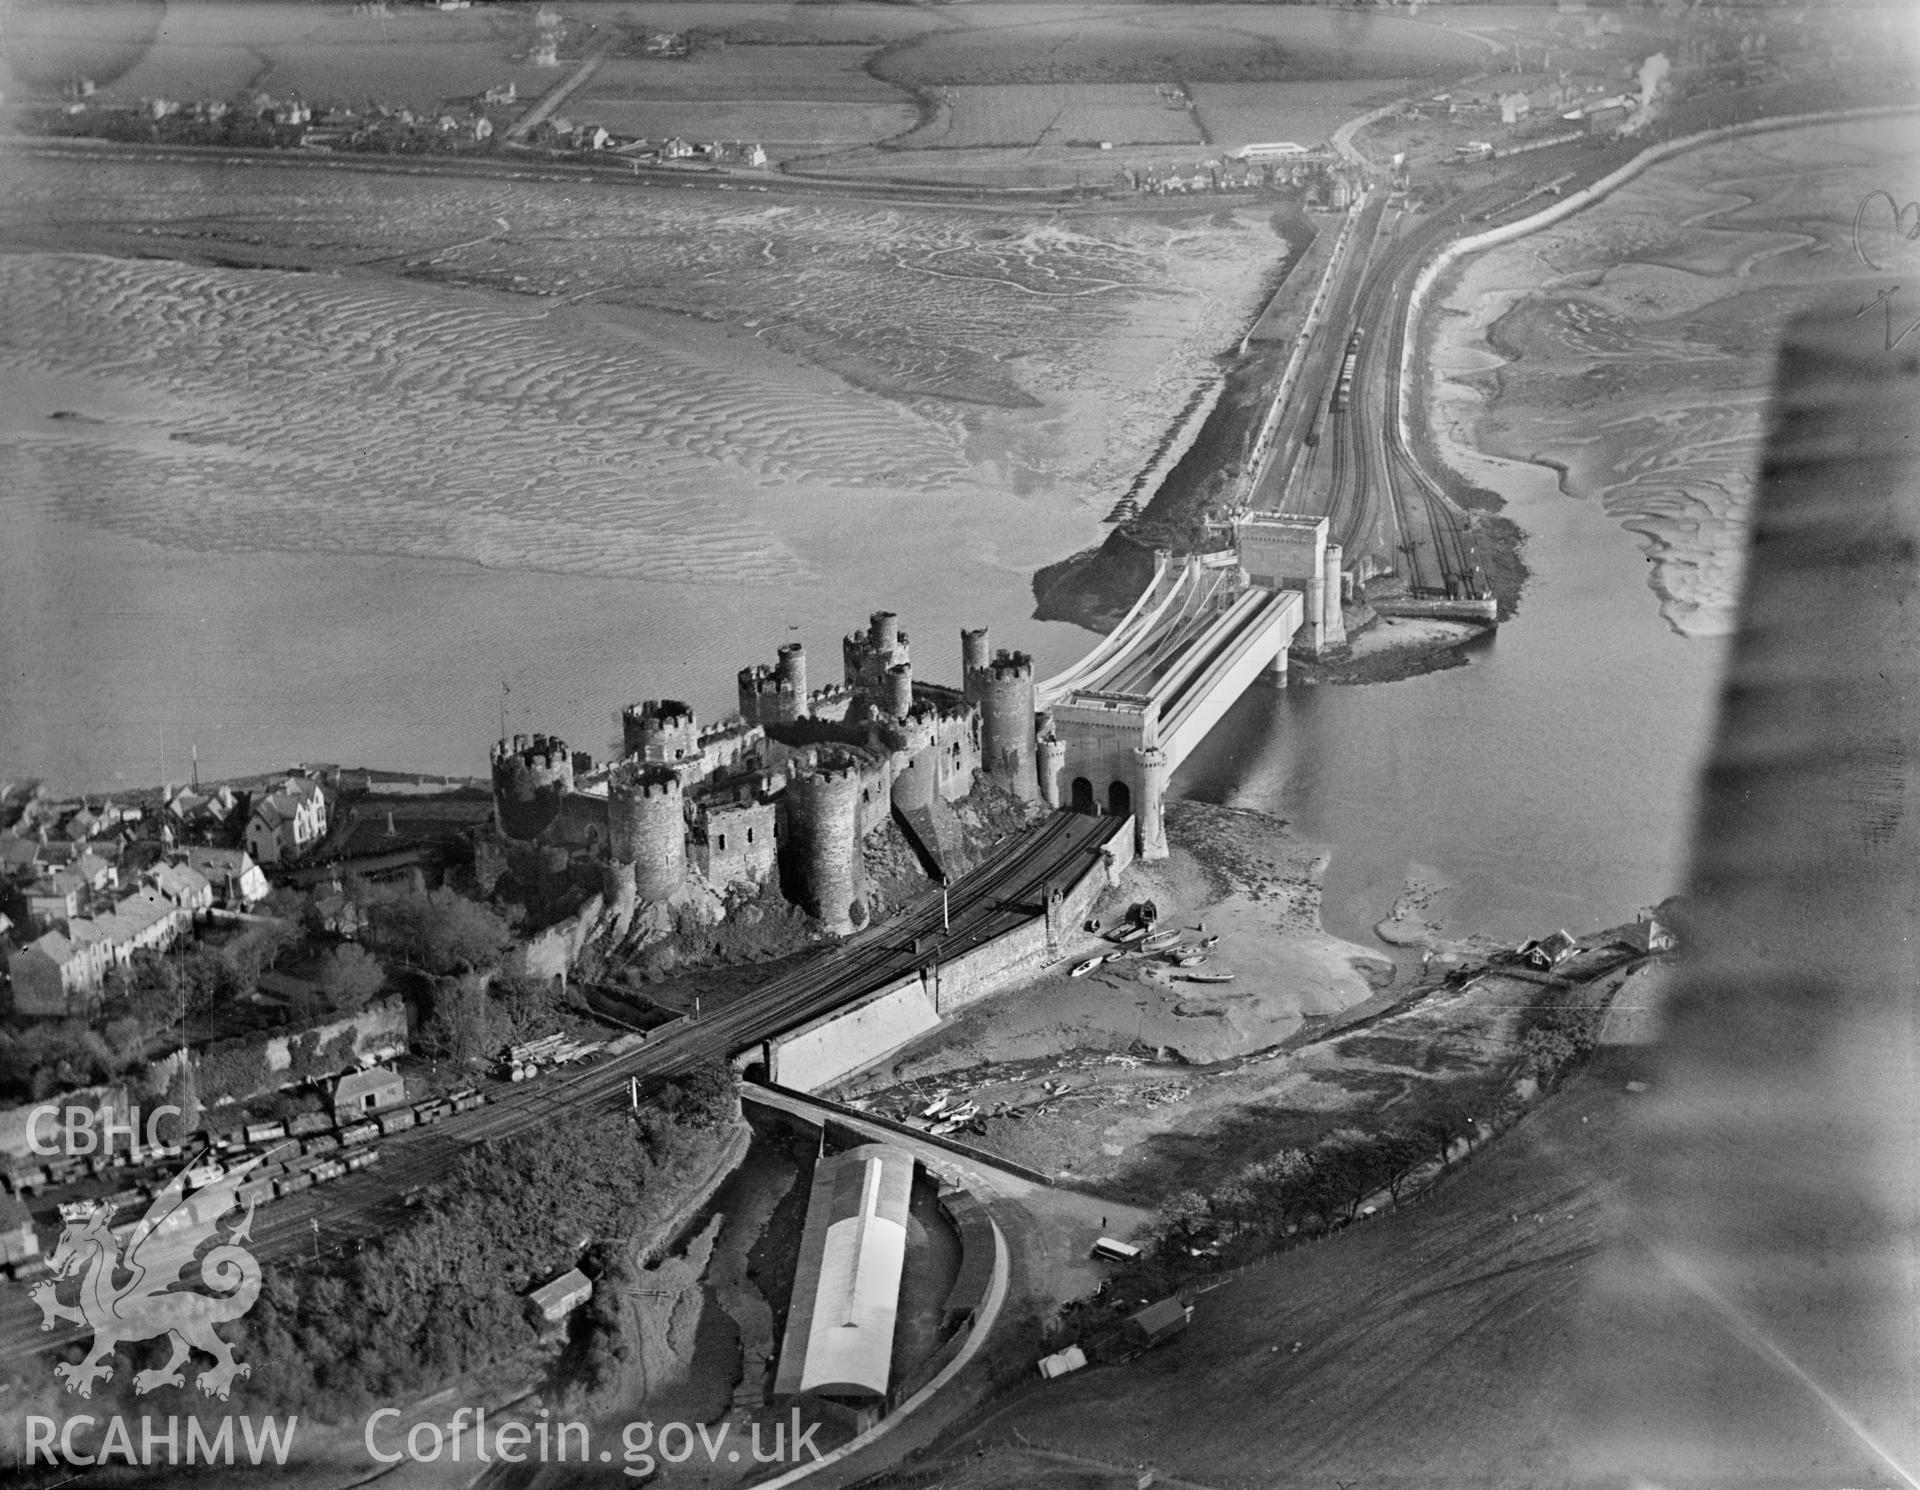 Conwy castle, railway and suspension bridges, oblique aerial view. 5?x4? black and white glass plate negative.